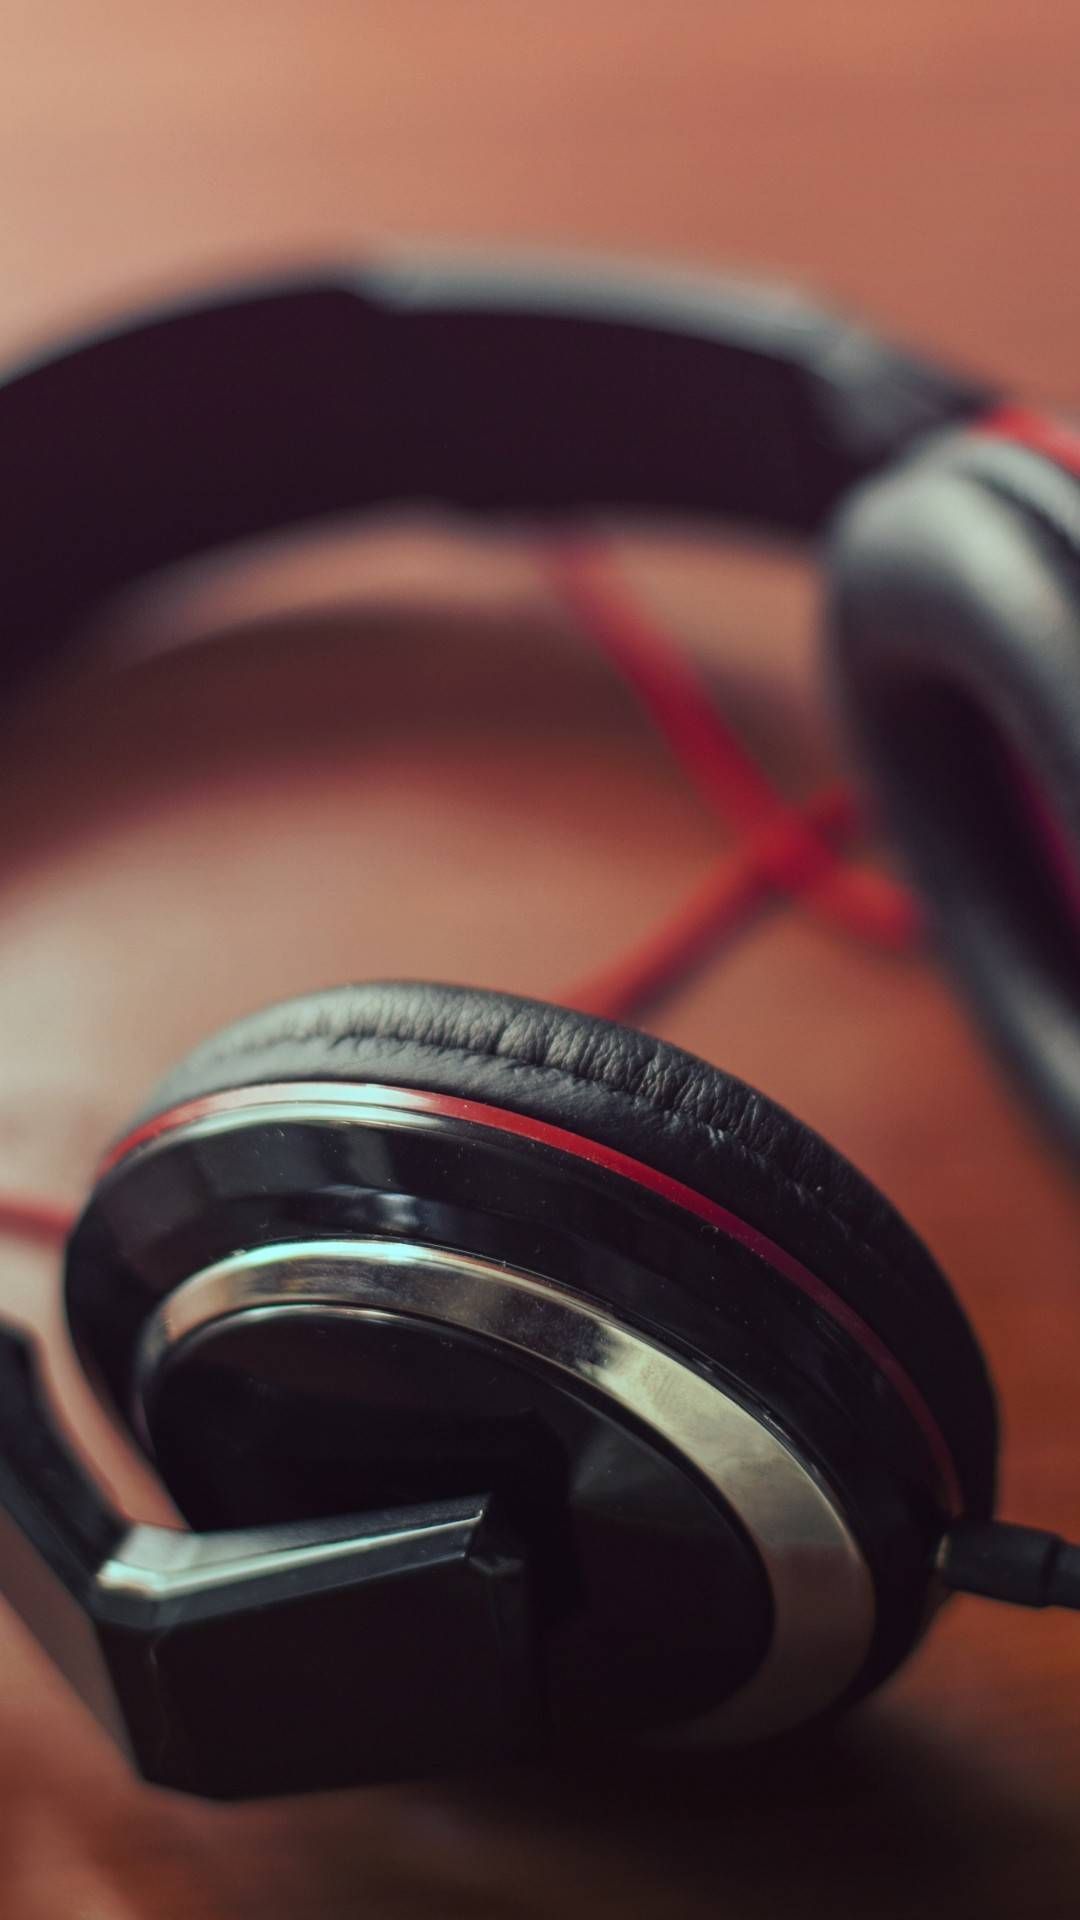 Cool Wallpaper For Mobile HD /cool Wallpaper For Mobile Hd HD Wallpaper. Headphones, Marketing Podcasts, Exercise For Kids